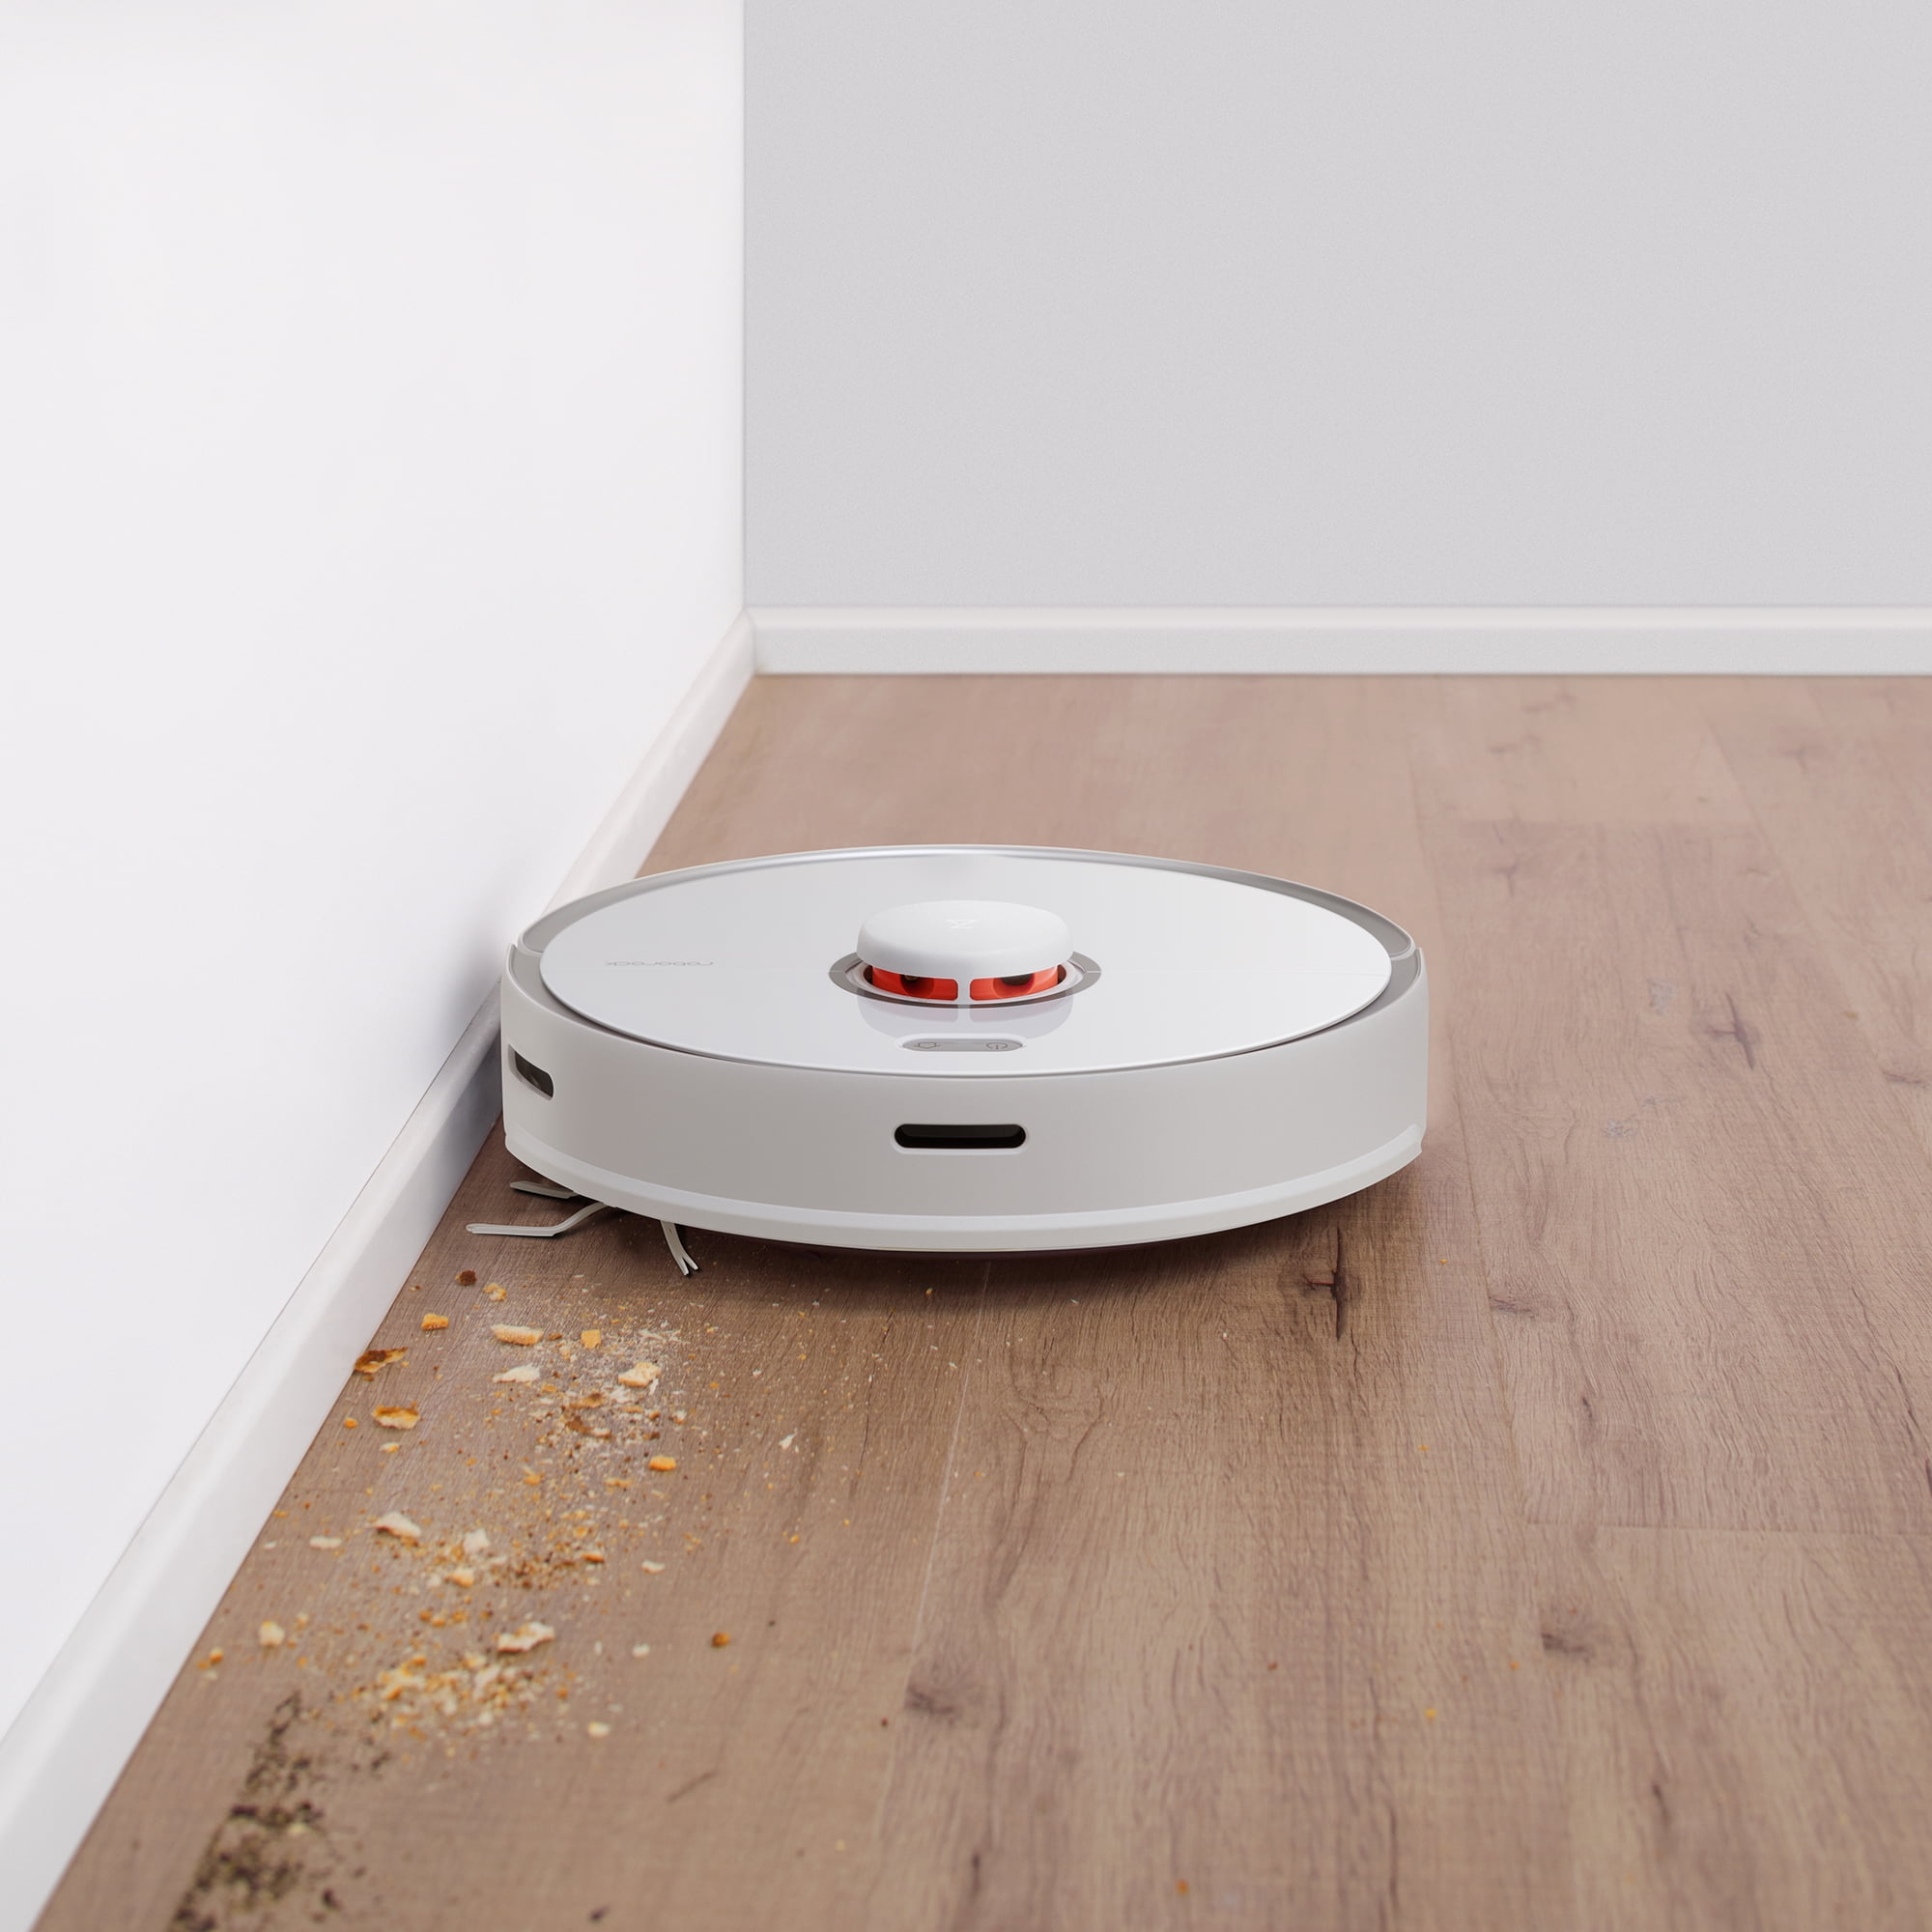 Buy Roborock S5 Max from £458.13 (Today) – Best Deals on